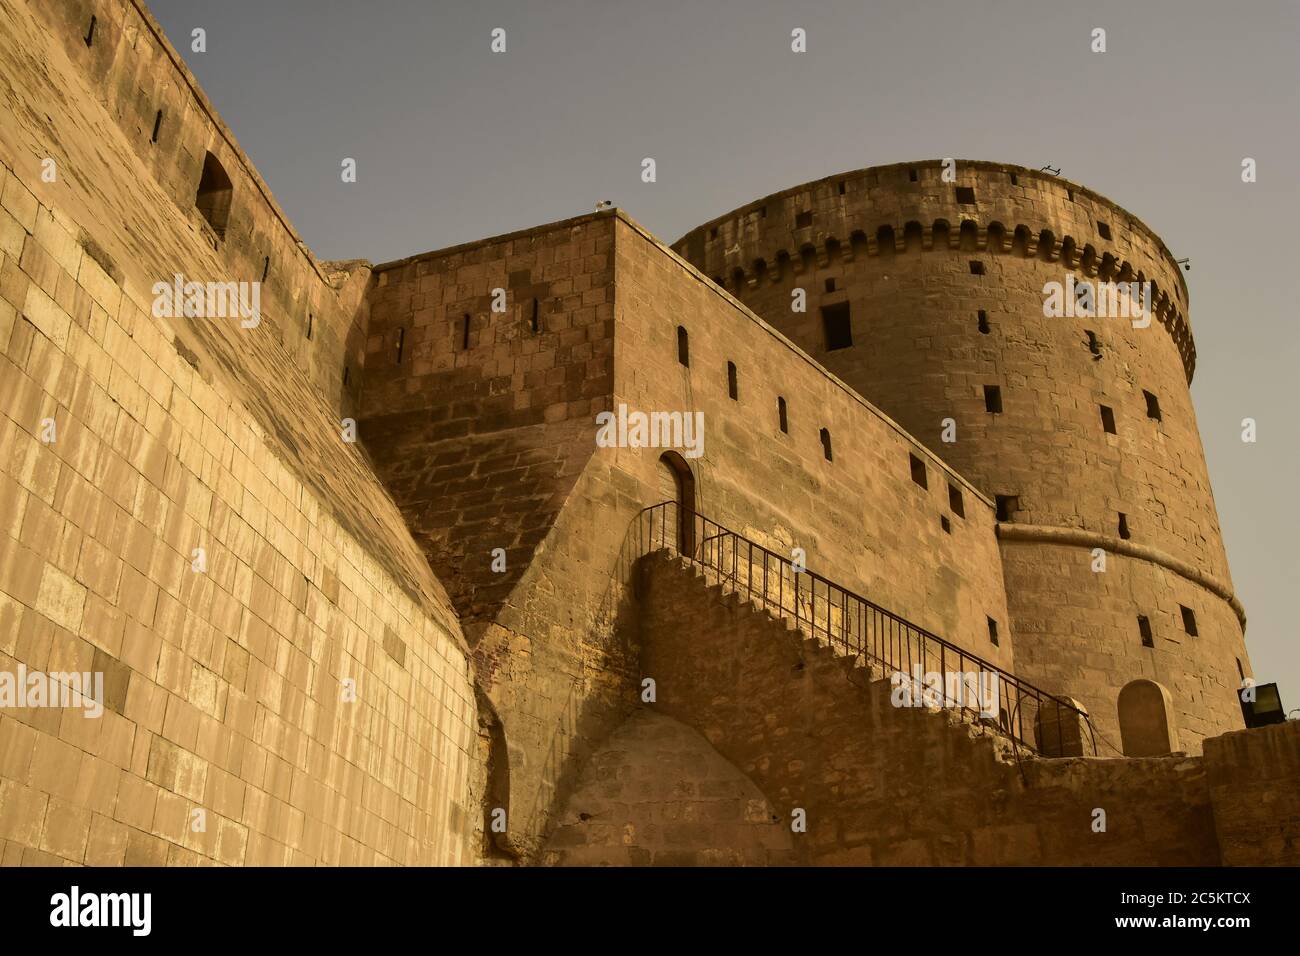 A tower in the Citadel, Cairo Stock Photo